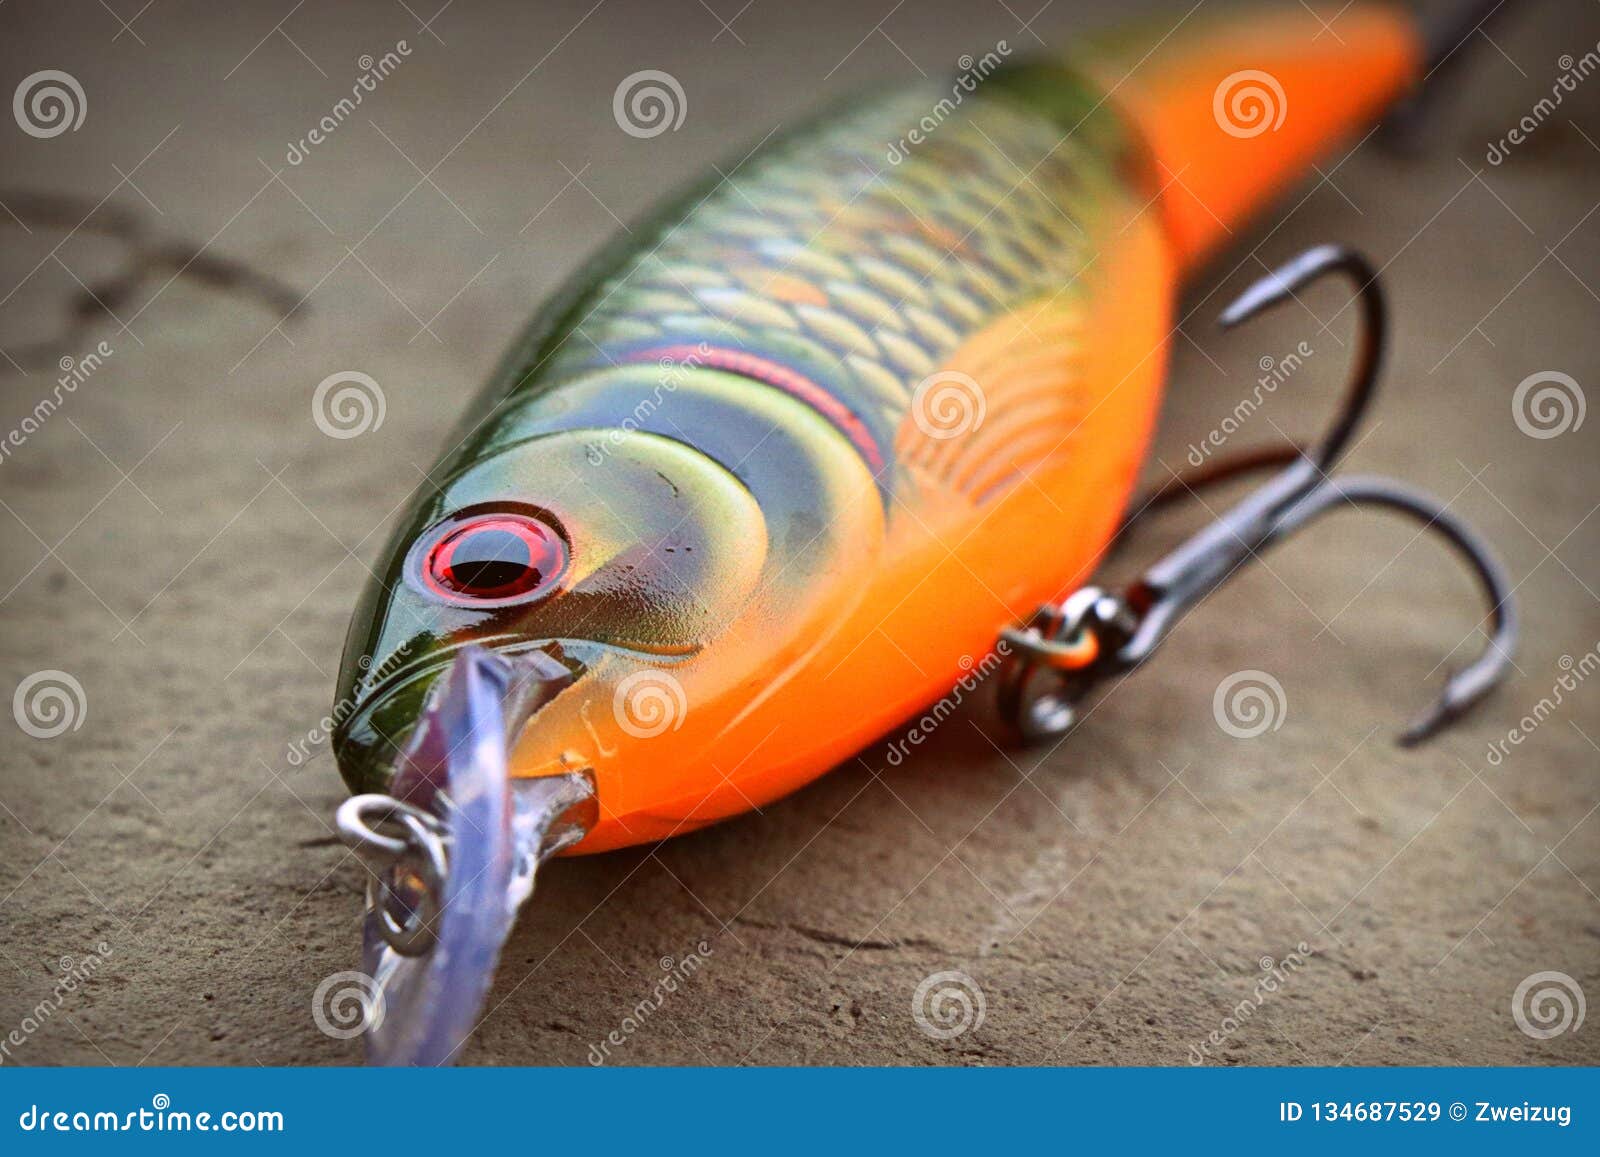 https://thumbs.dreamstime.com/z/excellent-lure-big-freshwater-predators-such-as-pike-muskie-large-bass-rapala-rap-jointed-fishing-plug-134687529.jpg